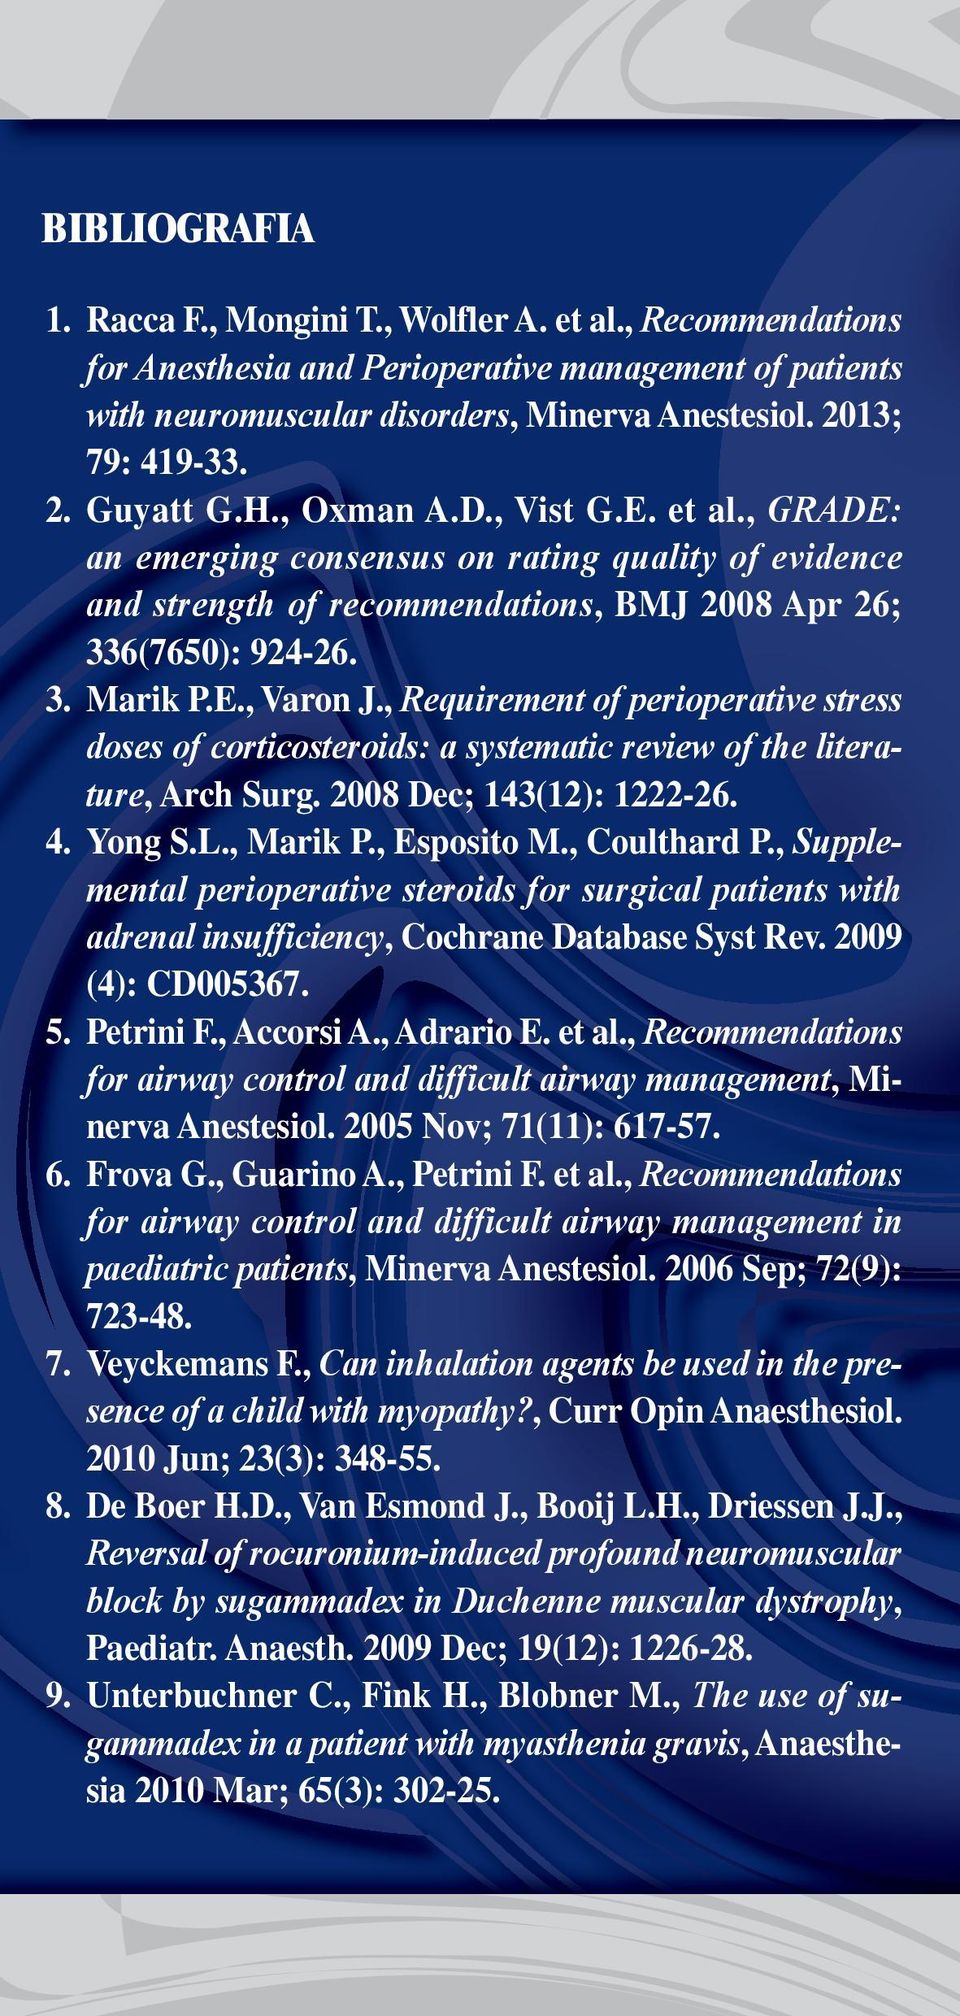 , Requirement of perioperative stress doses of corticosteroids: a systematic review of the literature, Arch Surg. 2008 Dec; 143(12): 1222-26. 4. Yong S.L., Marik P., Esposito M., Coulthard P.